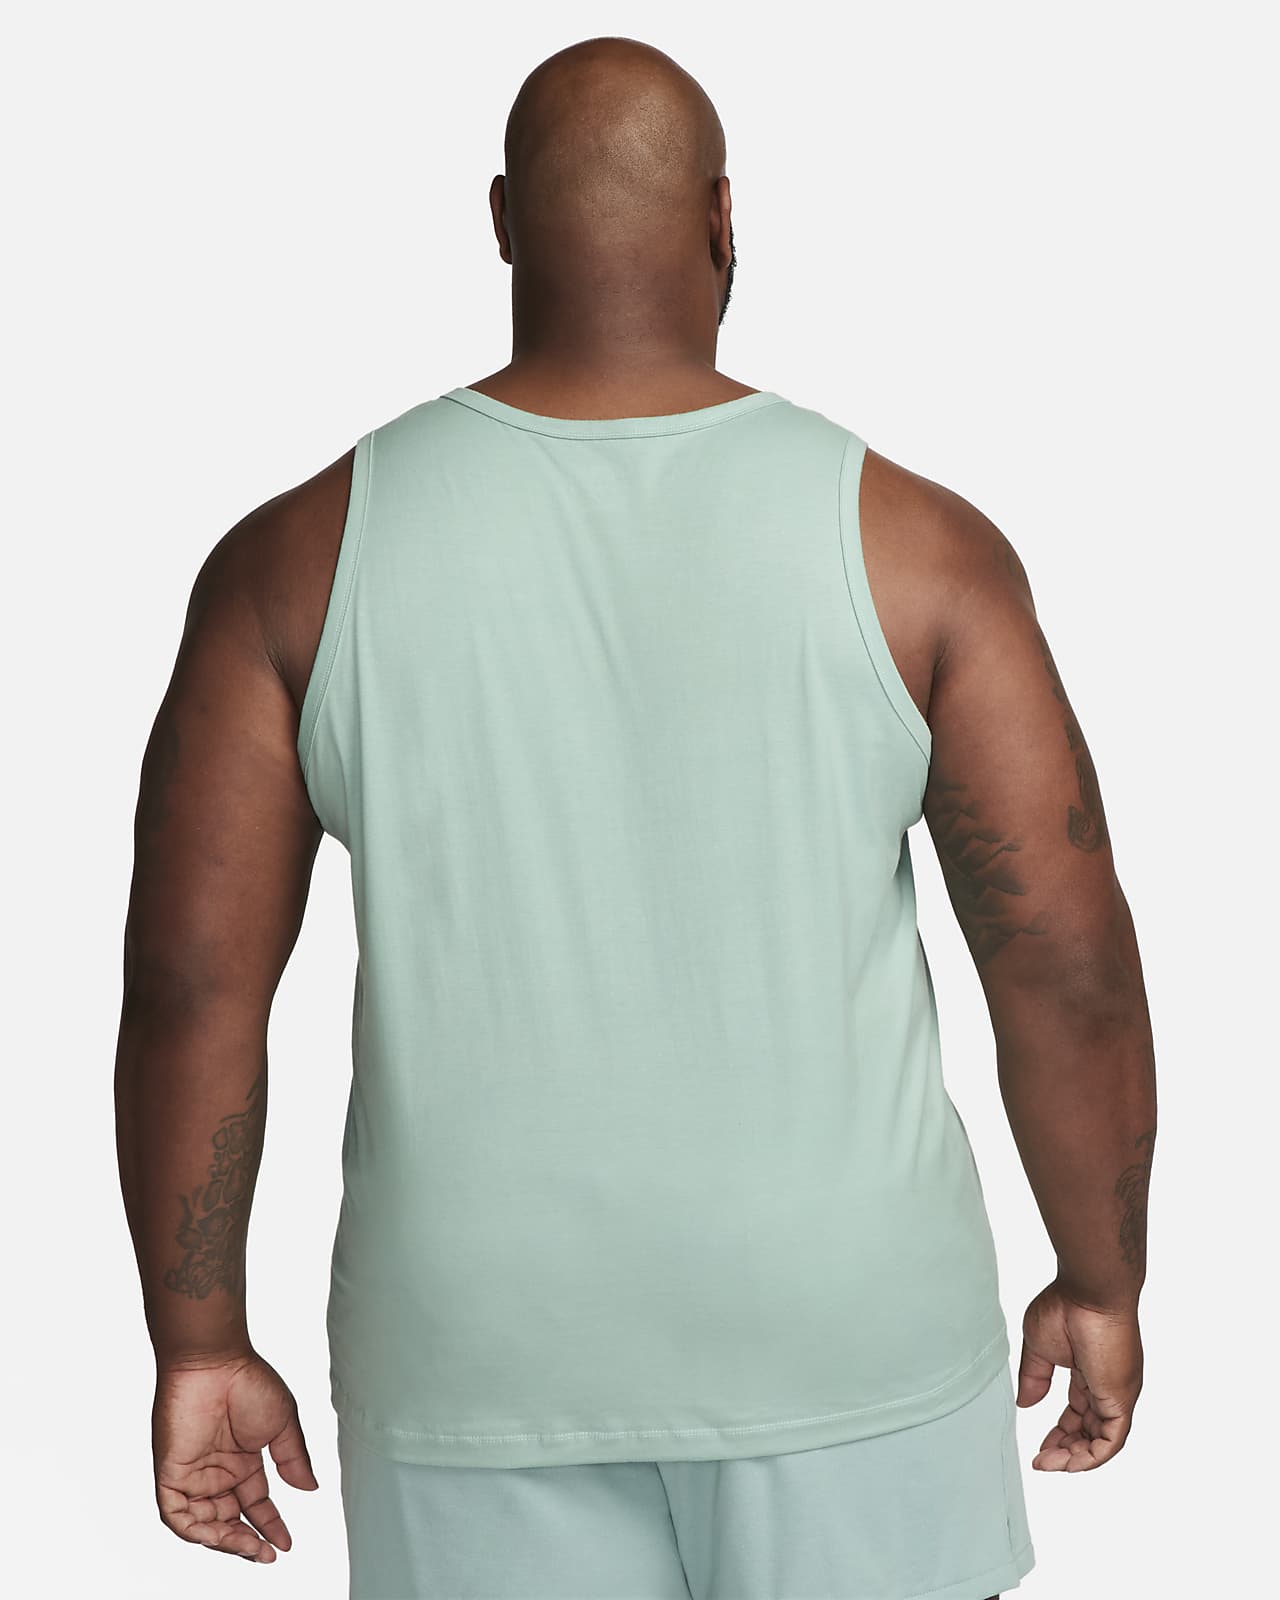 Nike M NSW Club-Tank Débardeur Homme, Black/(White), FR : S (Taille  Fabricant : S) : : Mode